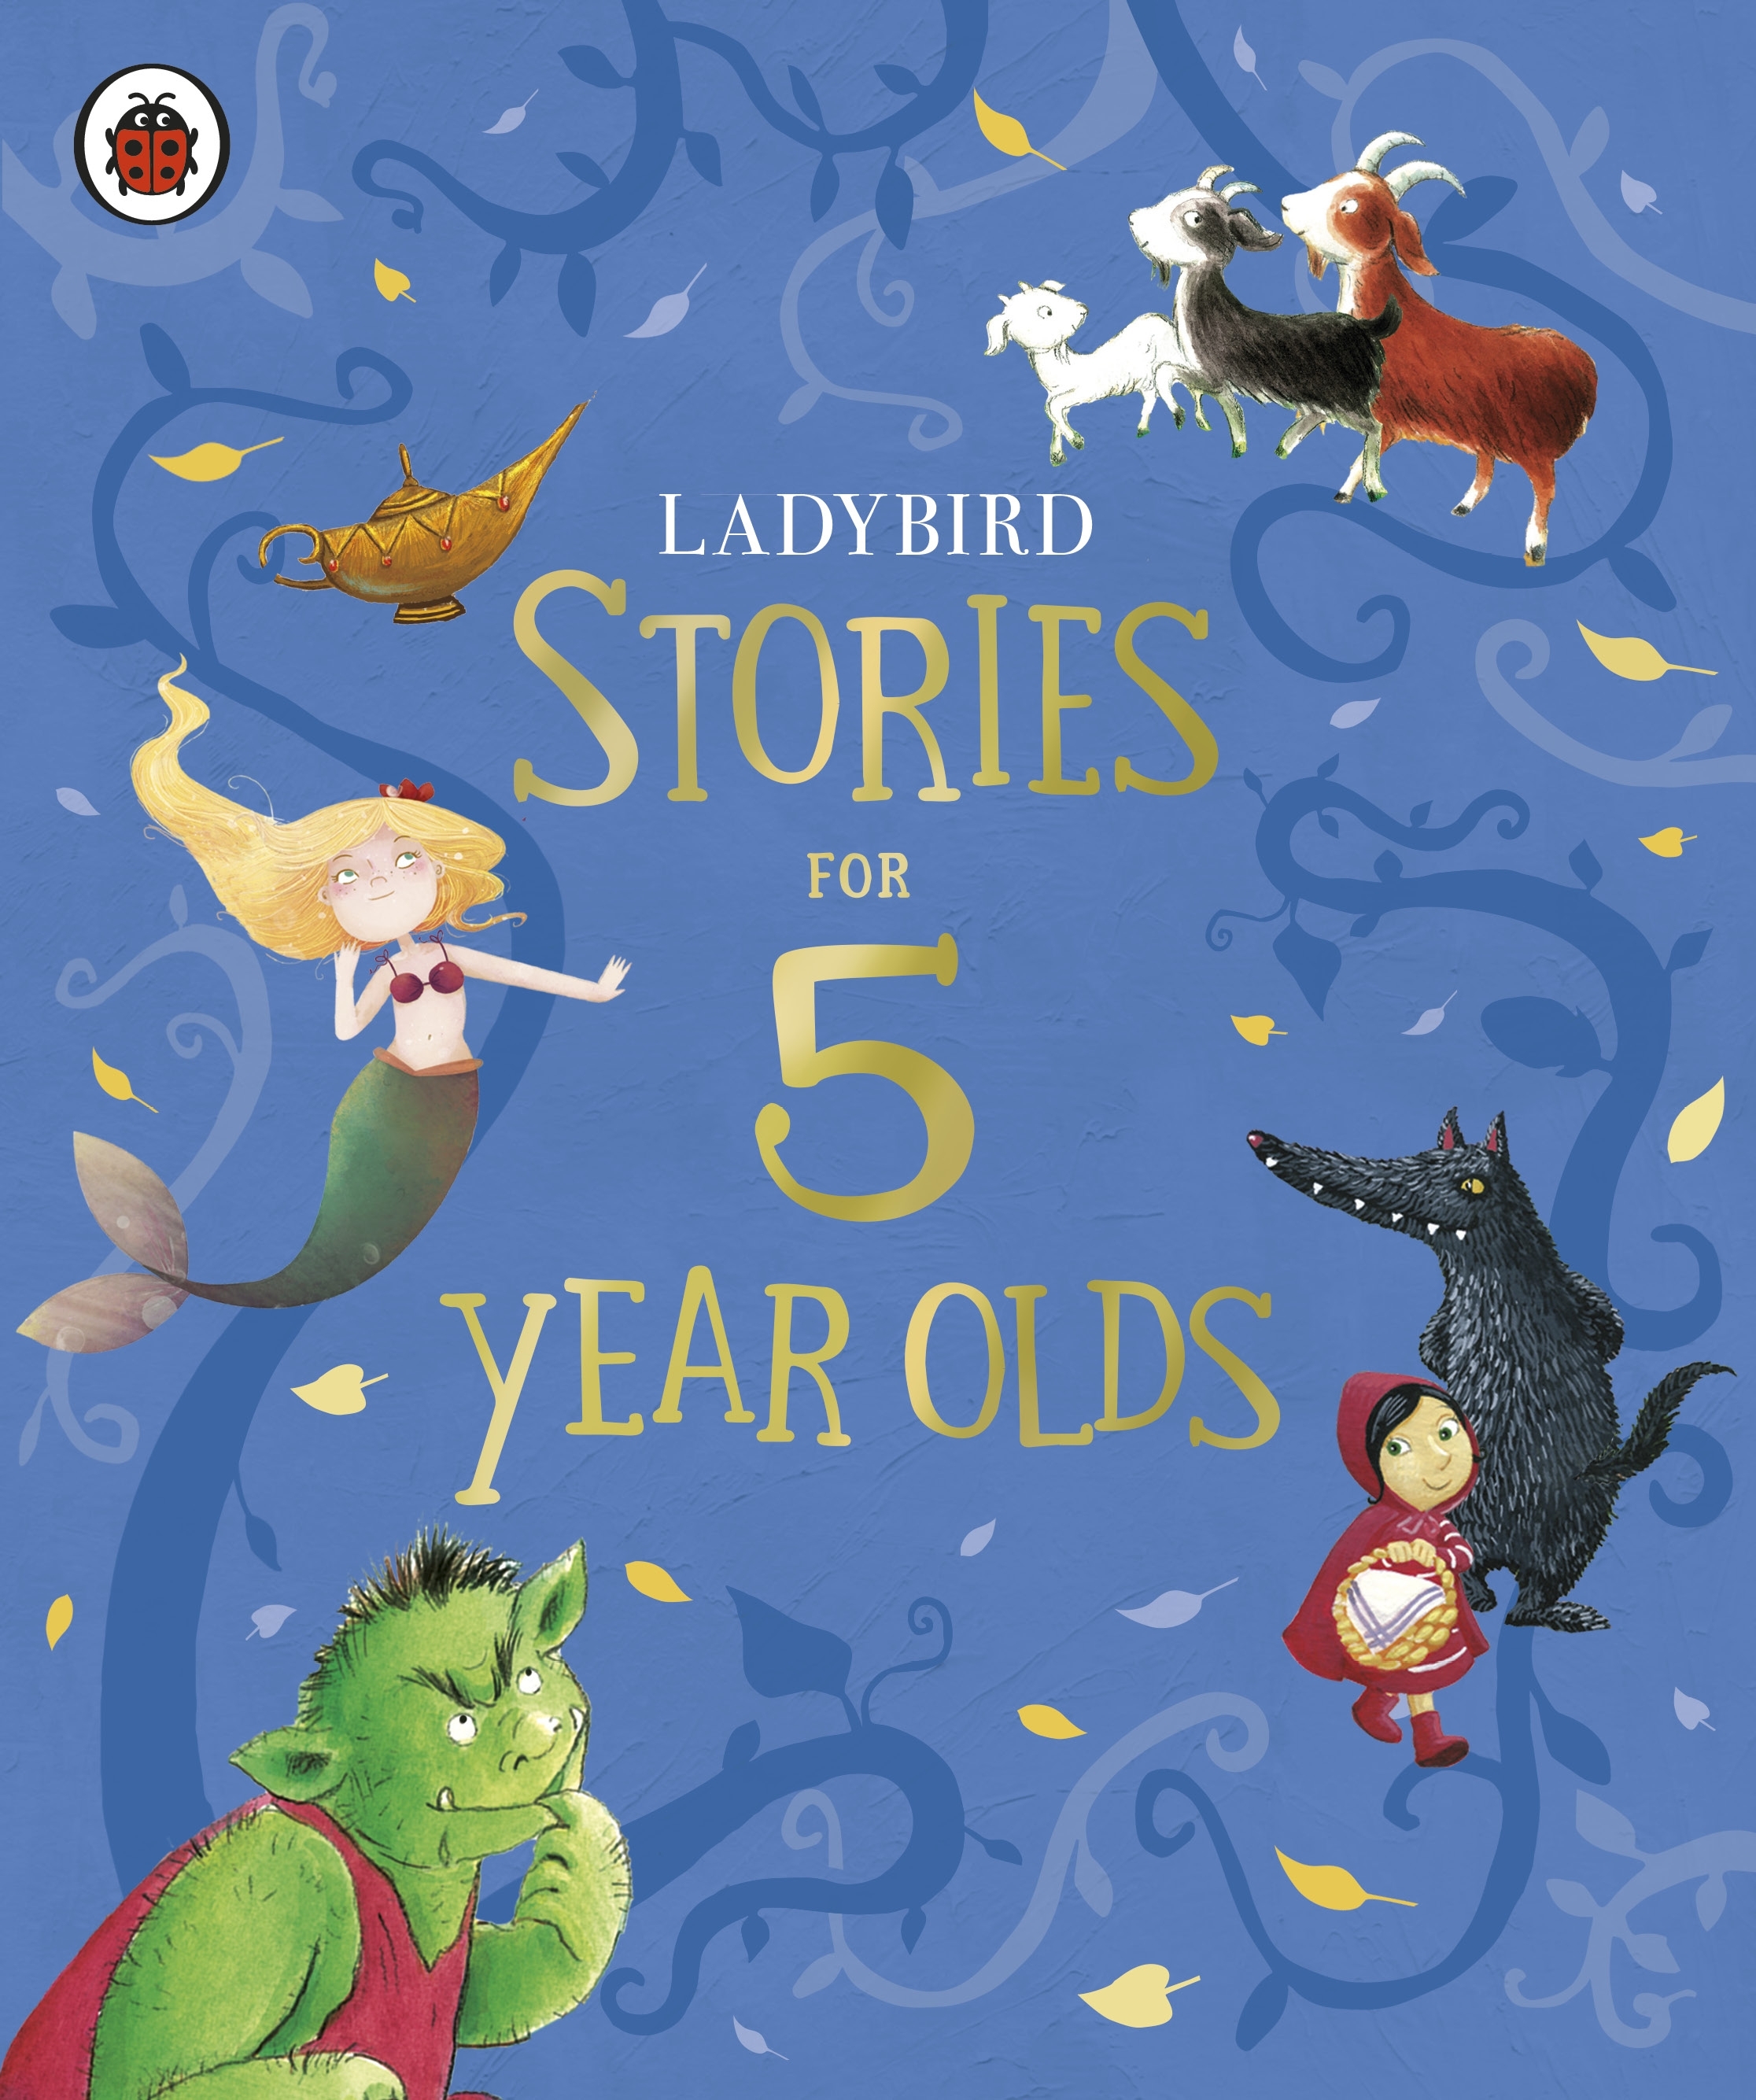 24-must-read-books-for-9-12-year-olds-children-s-fictional-stories